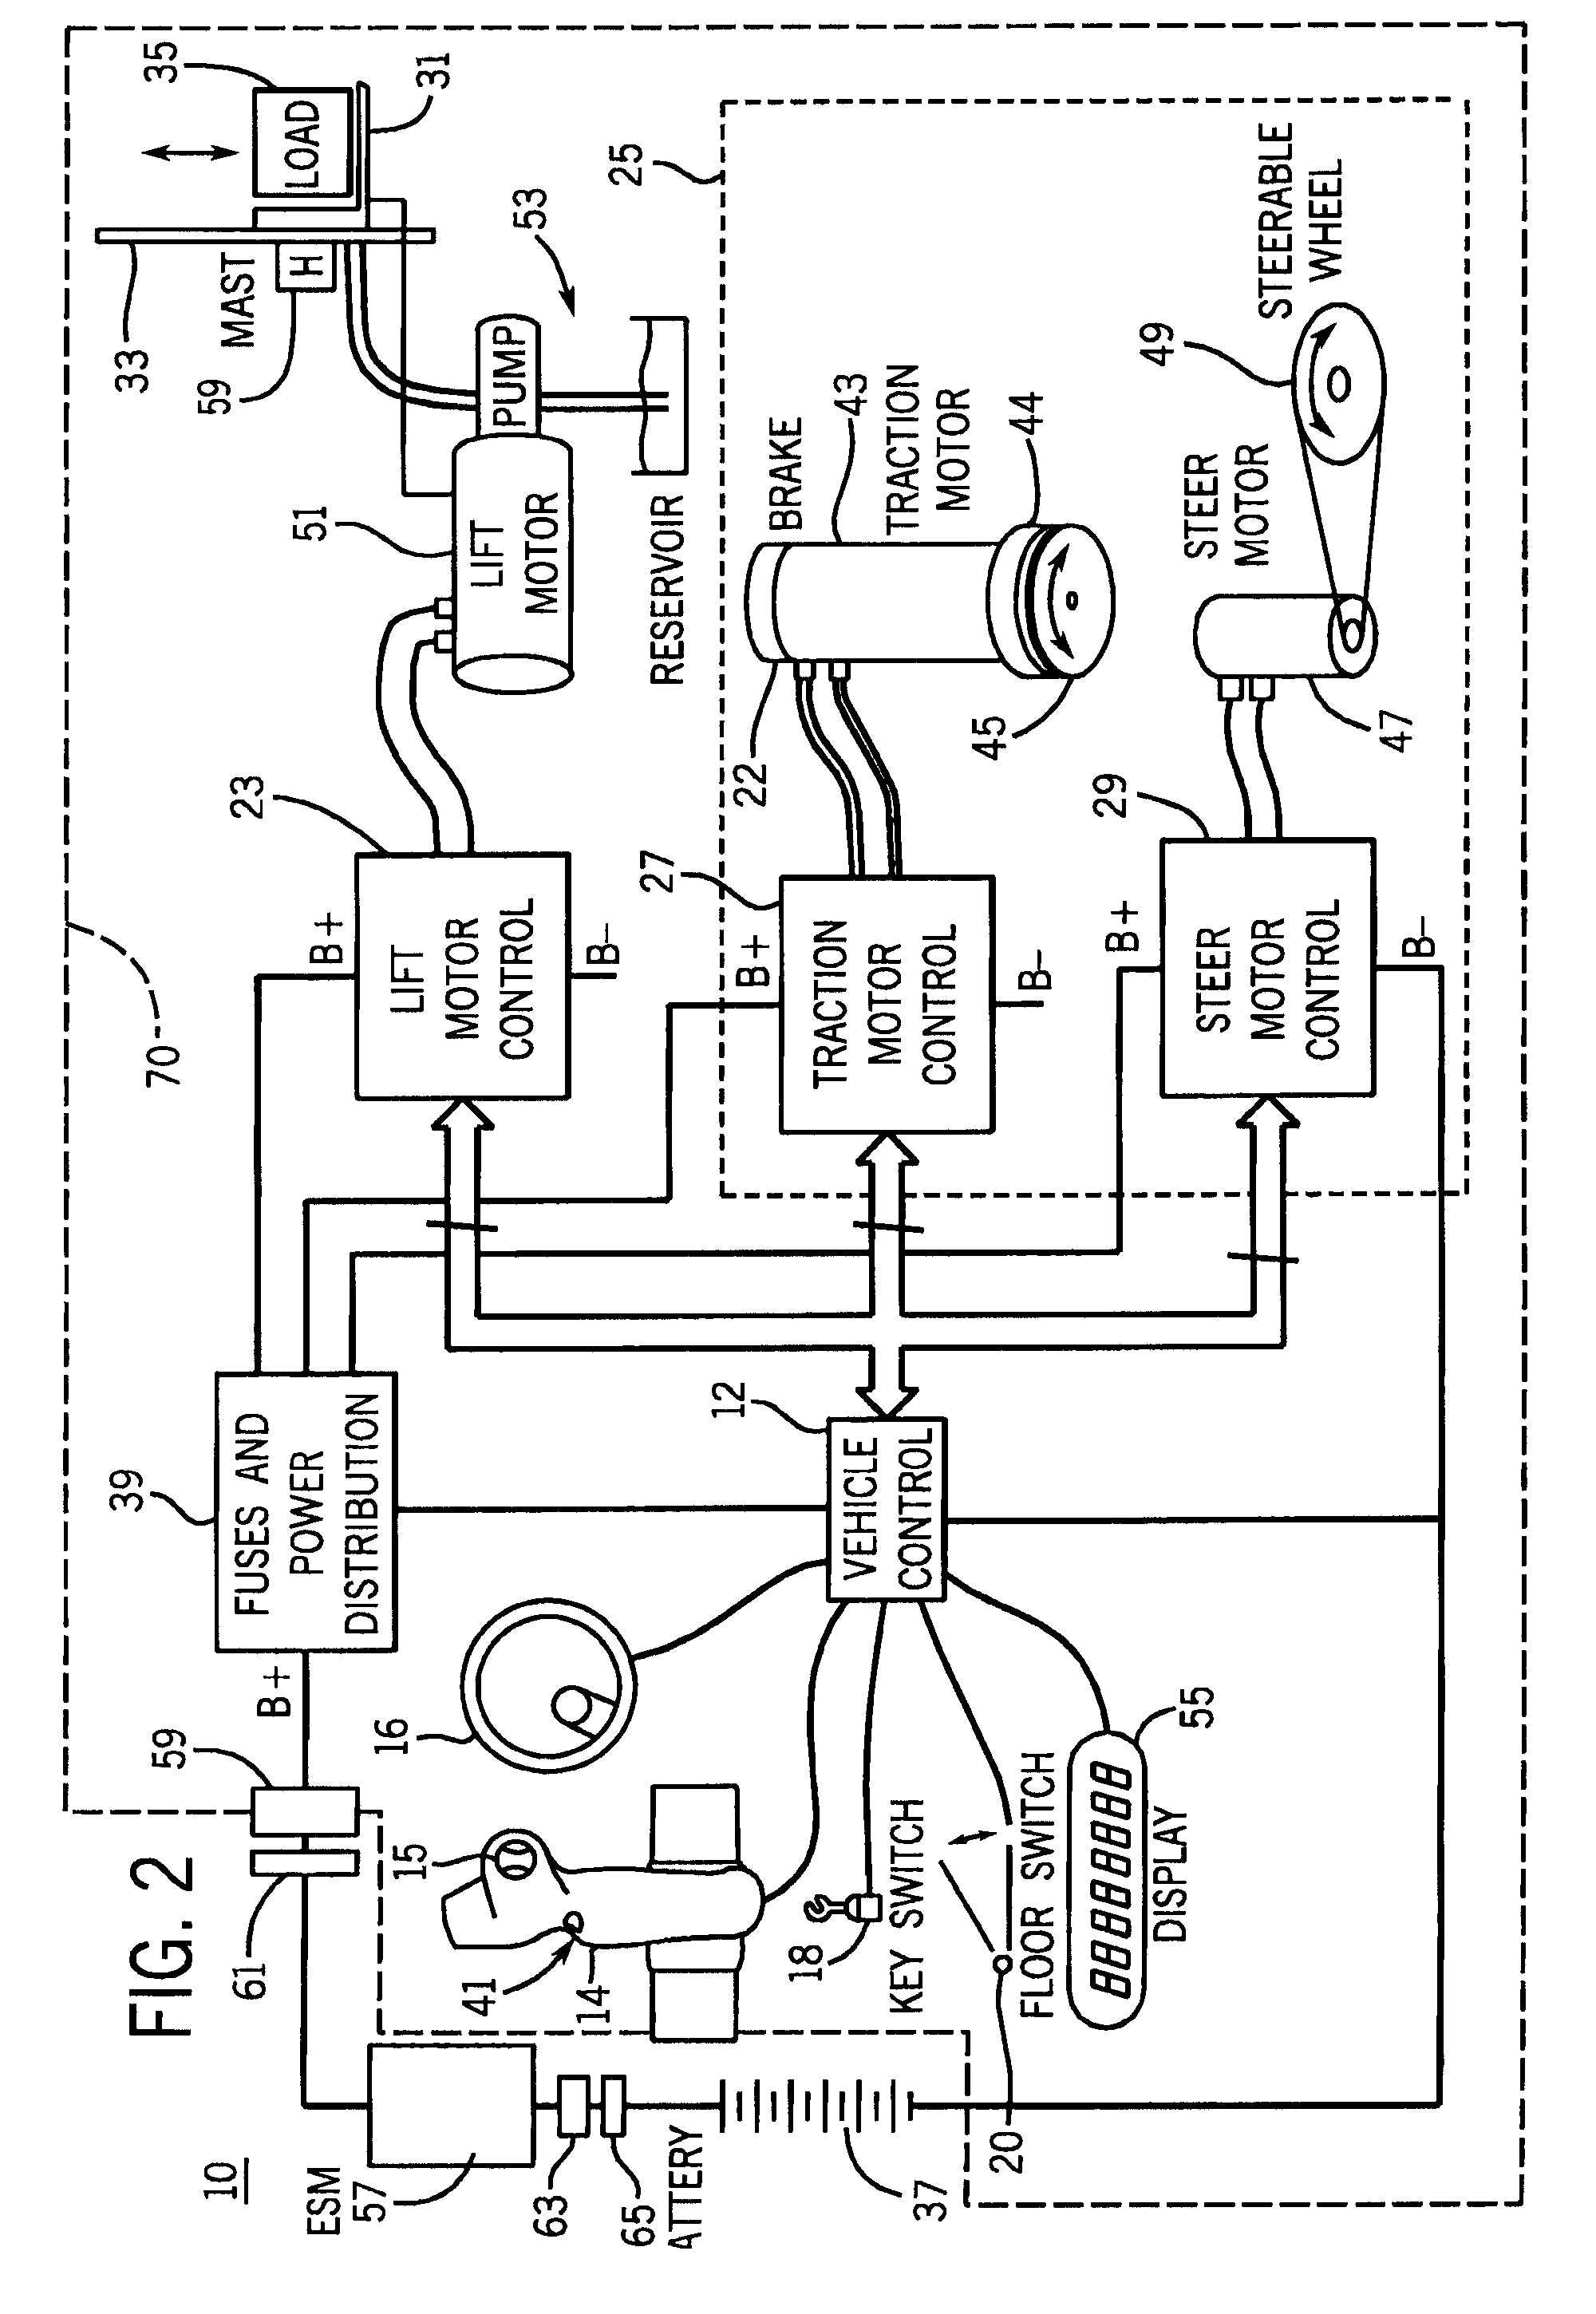 Energy Storage Module For Load Leveling In Lift Truck Or Other Electrical Vehicle